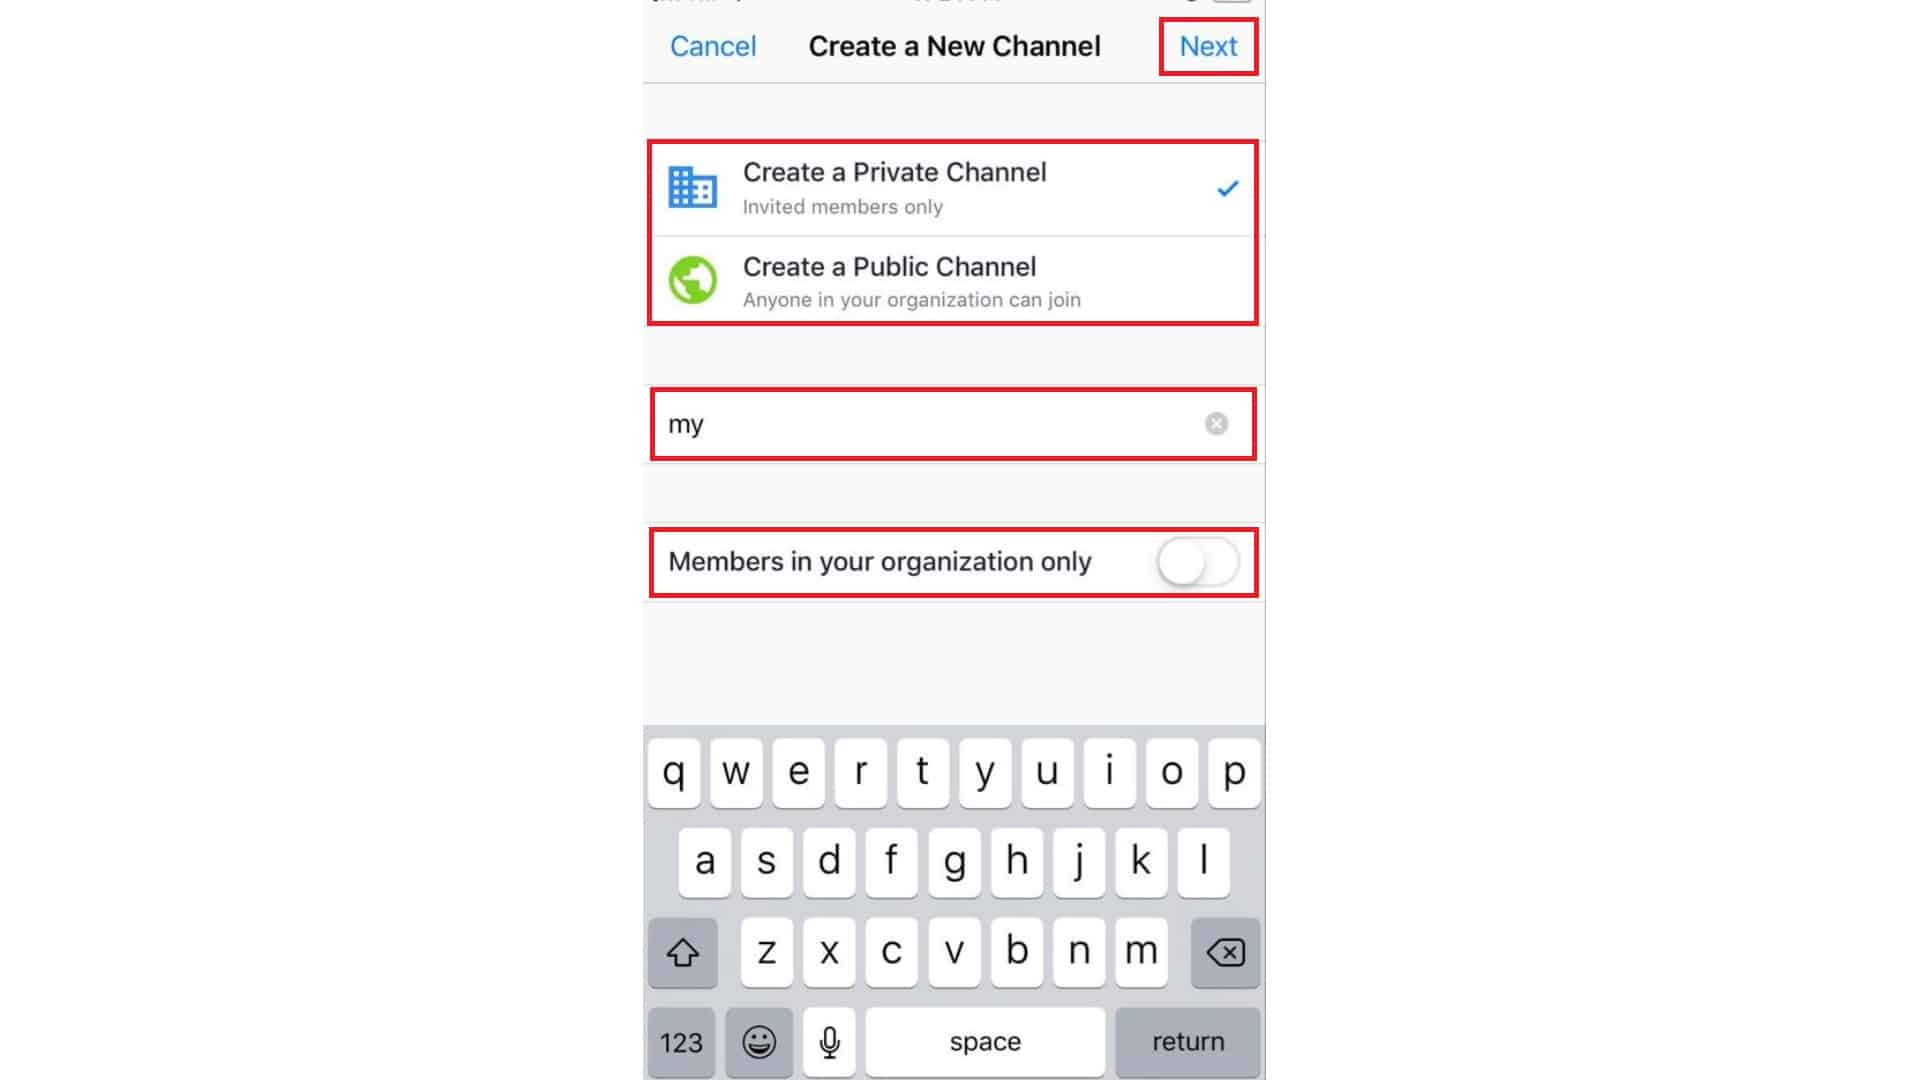 Create-a-New-Channel-on-Zoom for-iOS-2020-guide